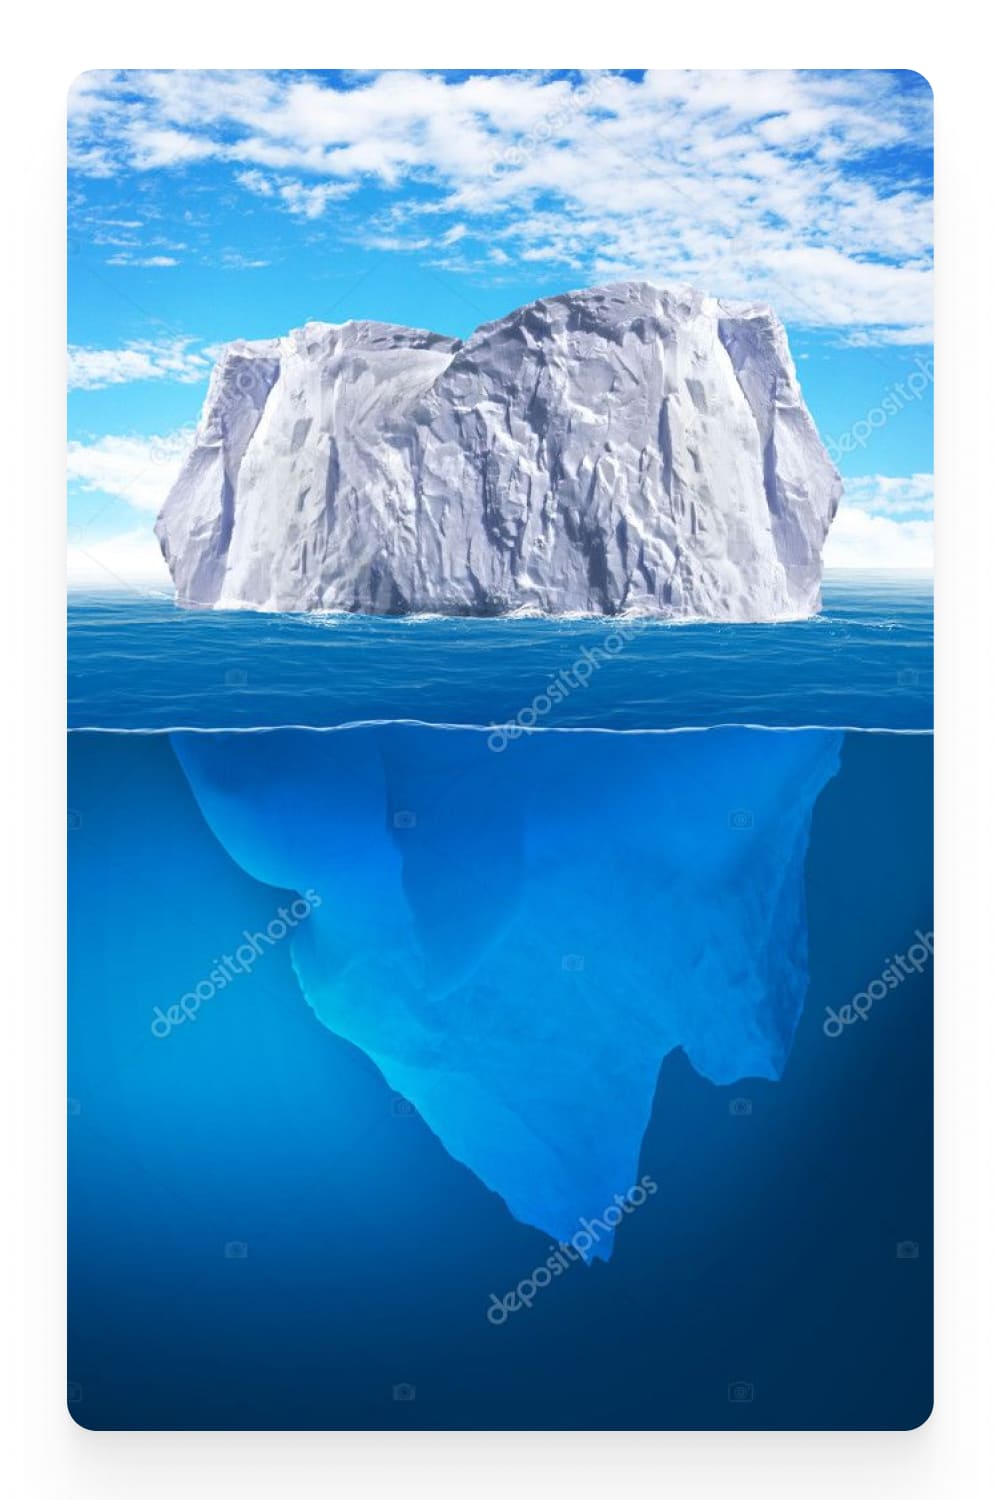 Iceberg photography underwater and above water.